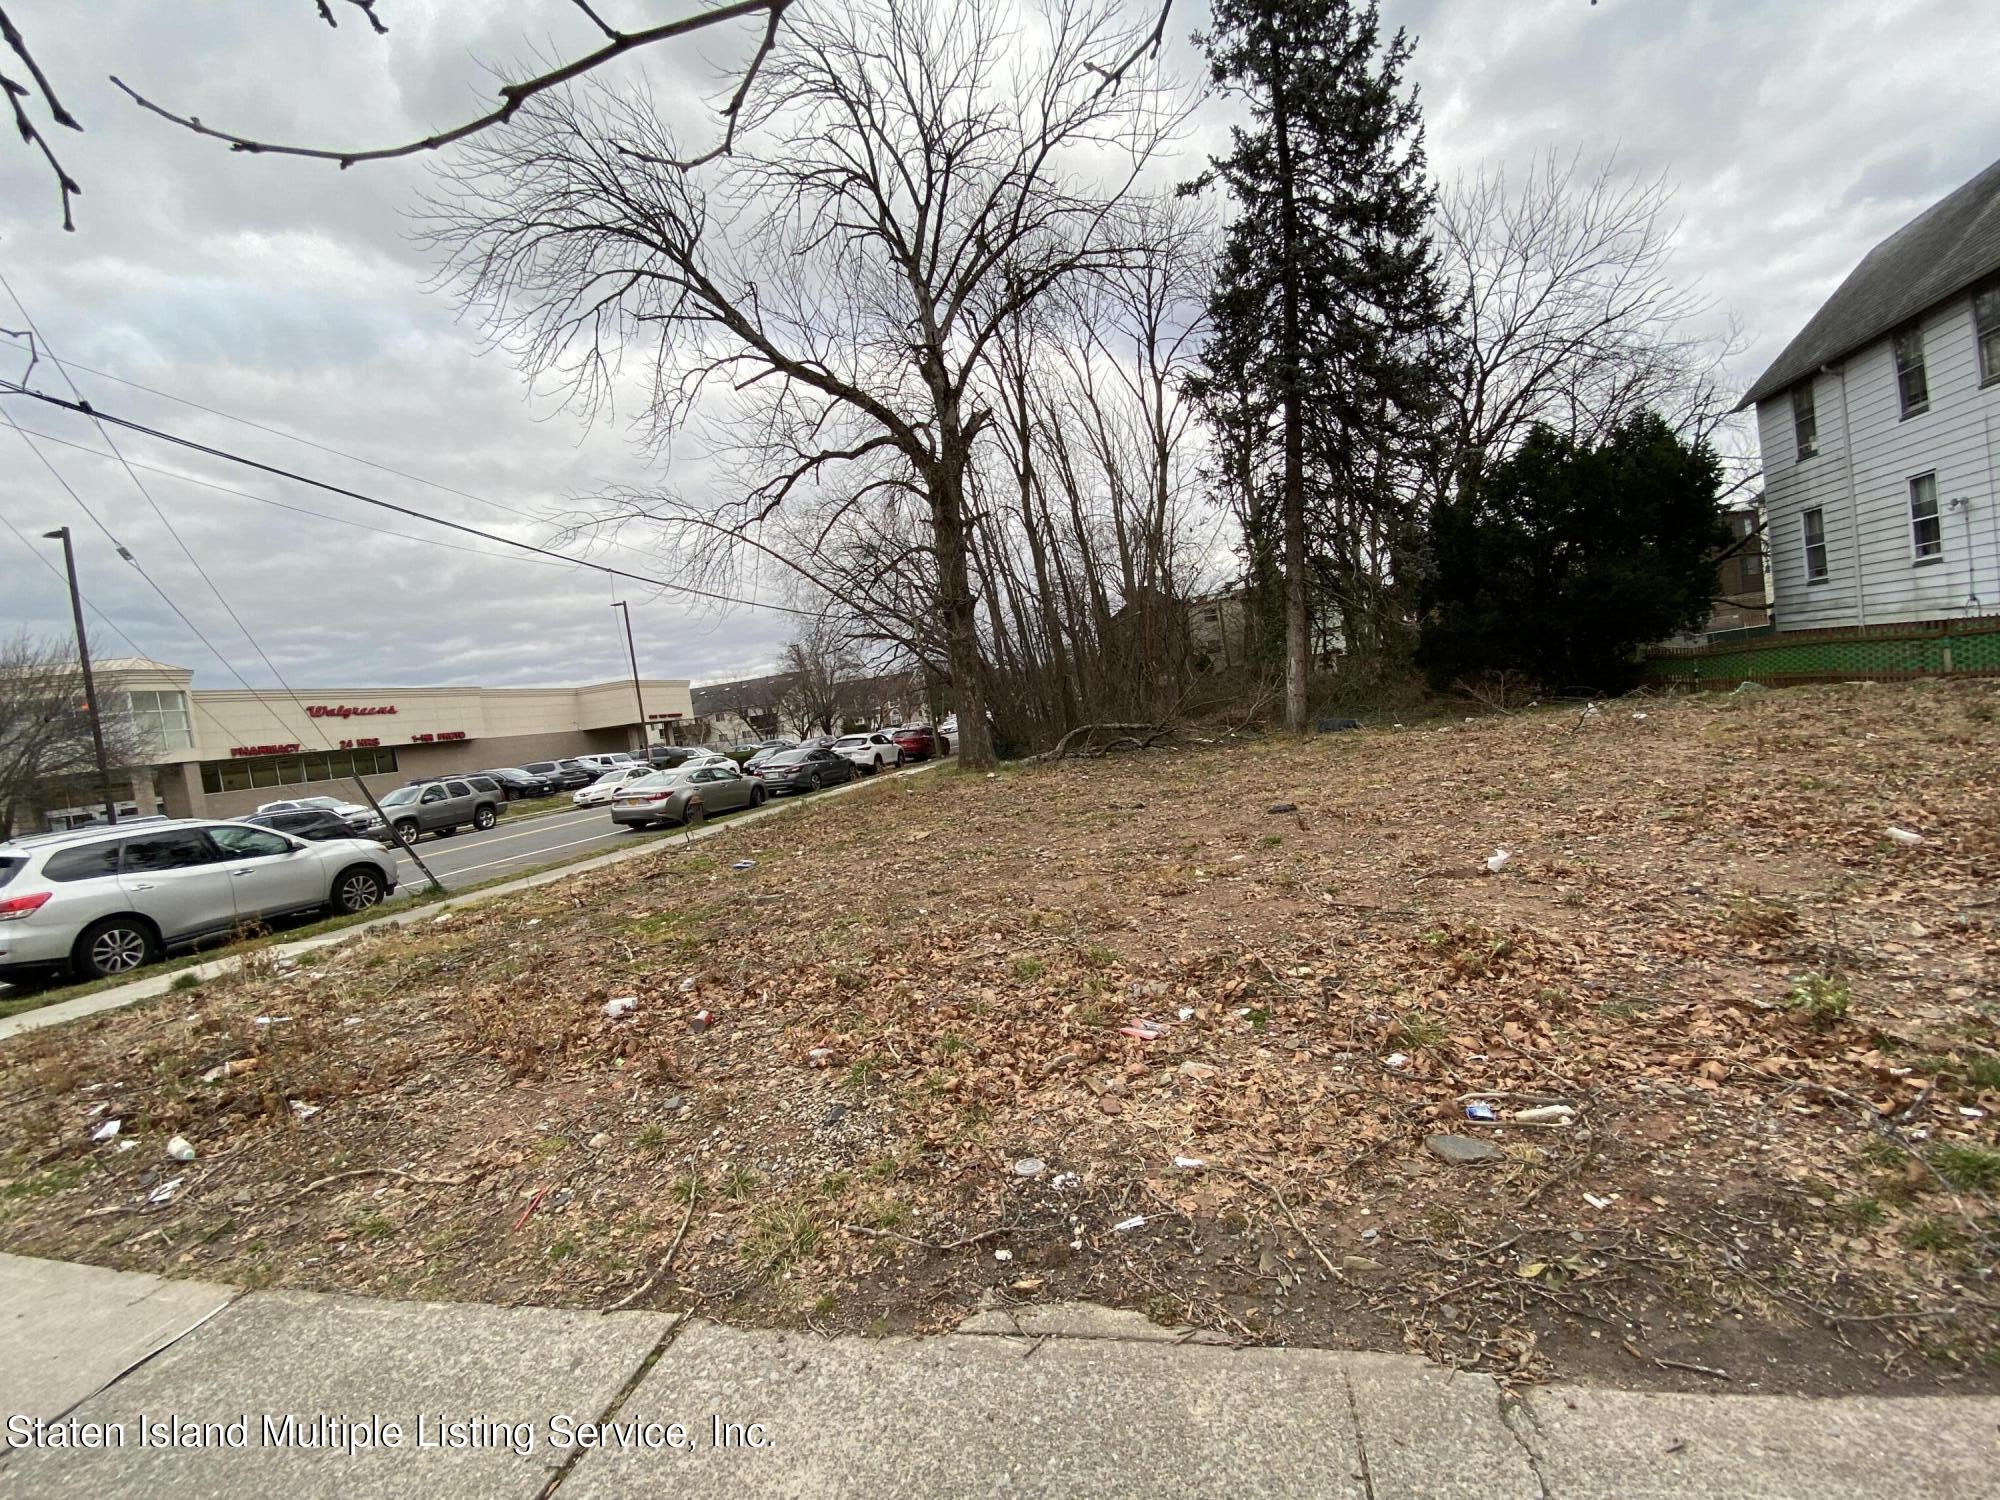 a view of a yard with car parked on the road